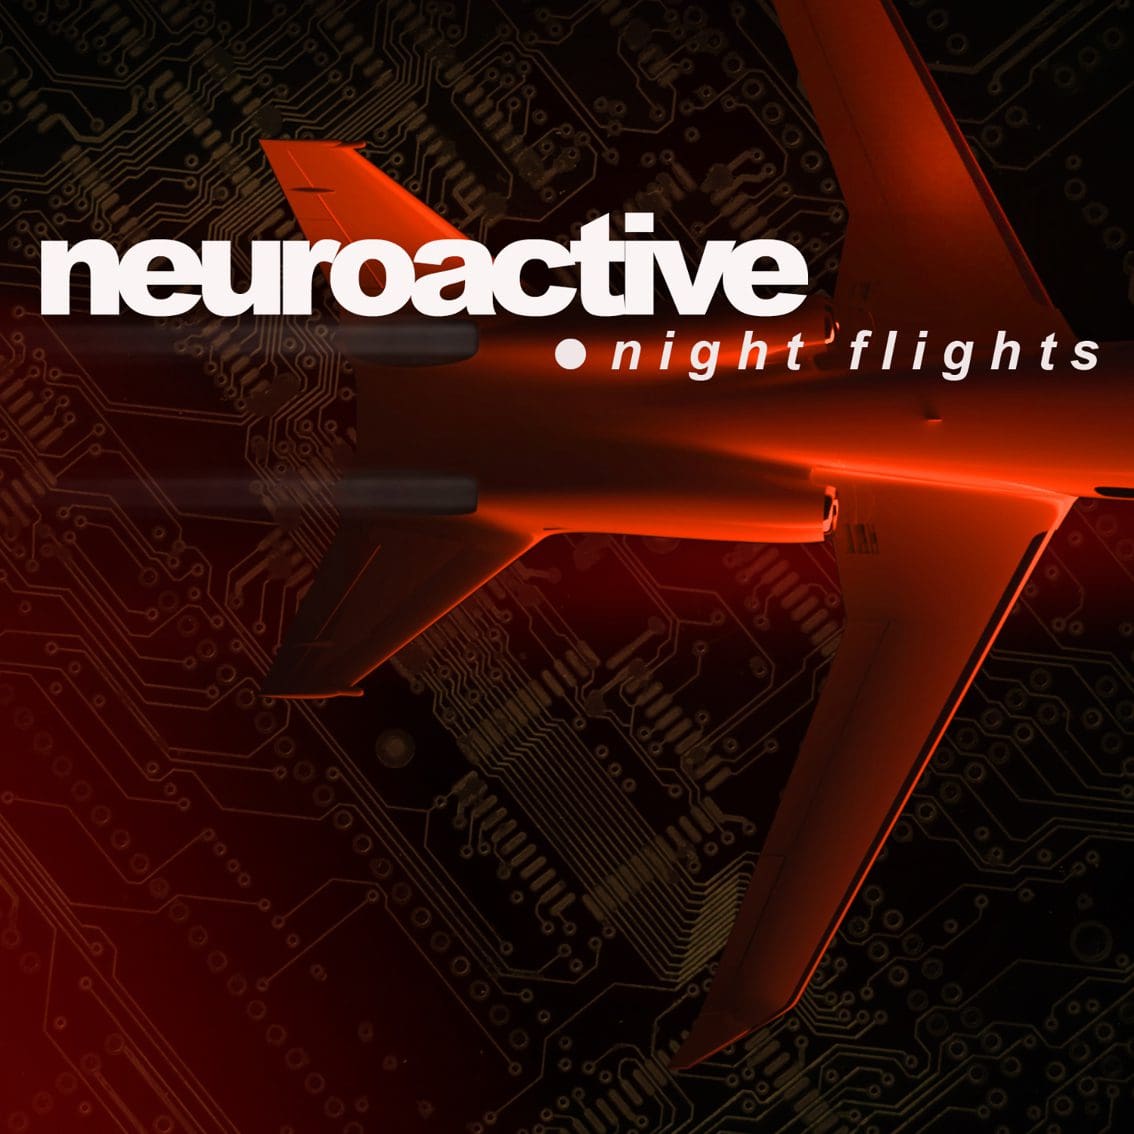 Cult synth pop act Neuroactive returns - first 2-track single available now